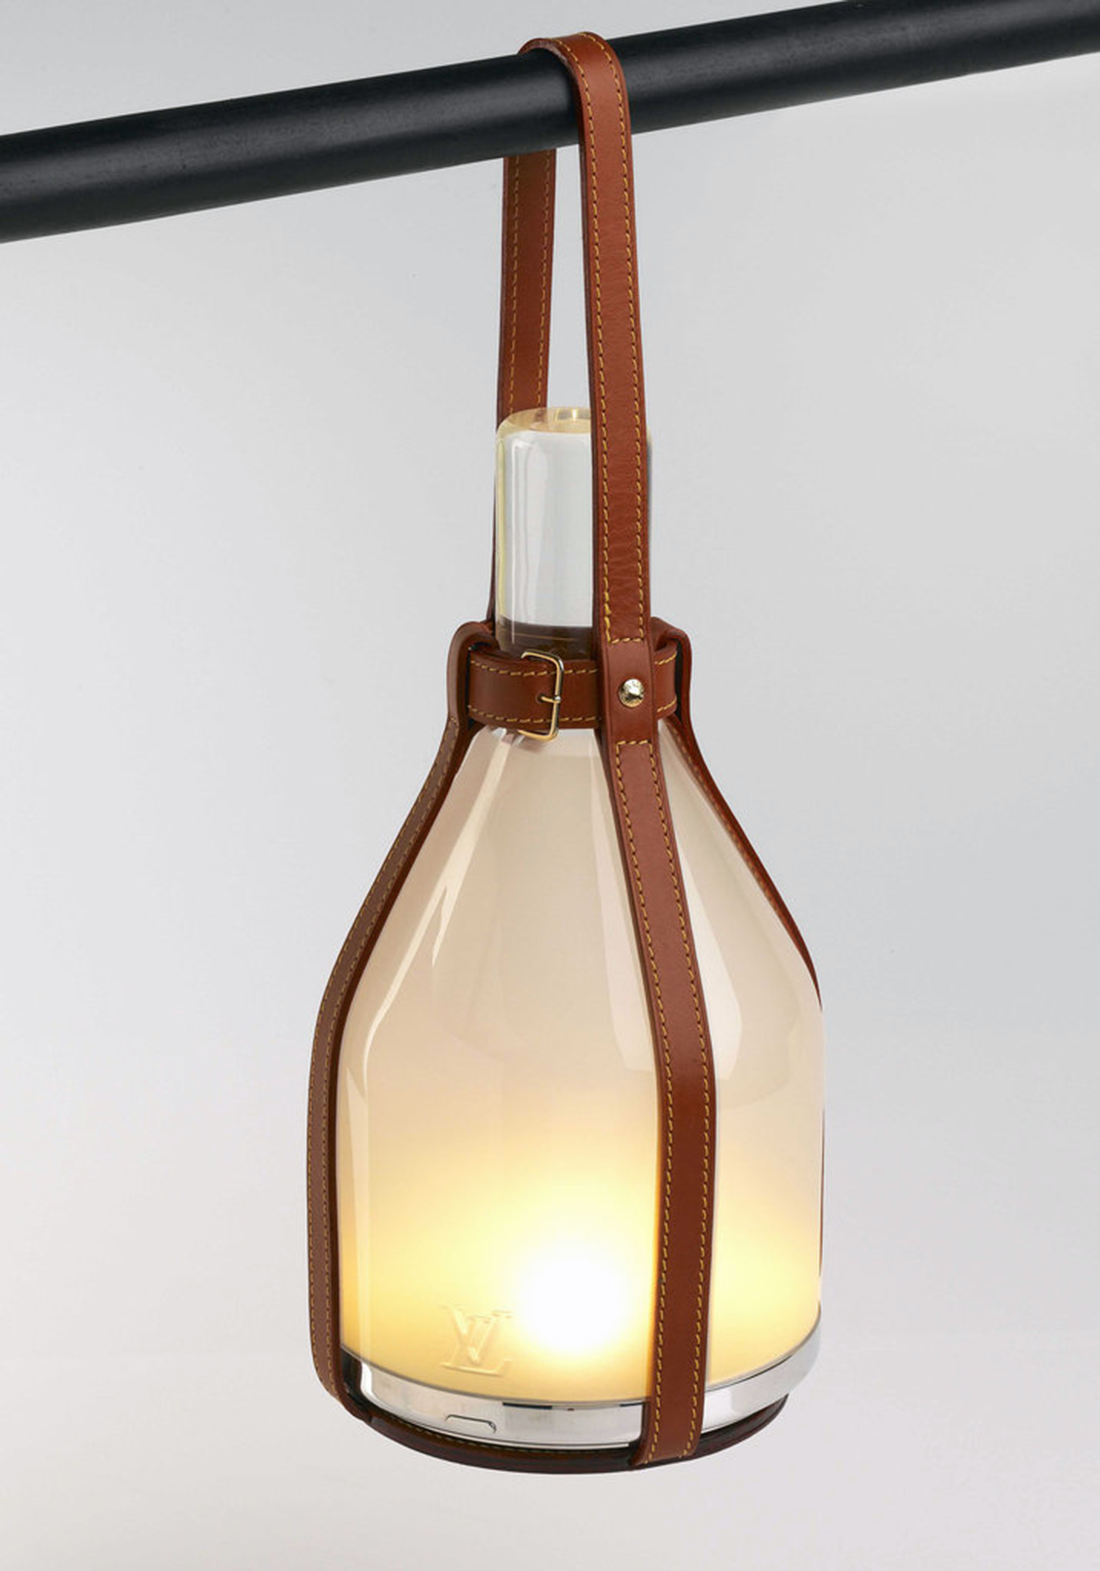 Bell Lamp By Edward Barber & Jay Osgerby Leather & Other Materials